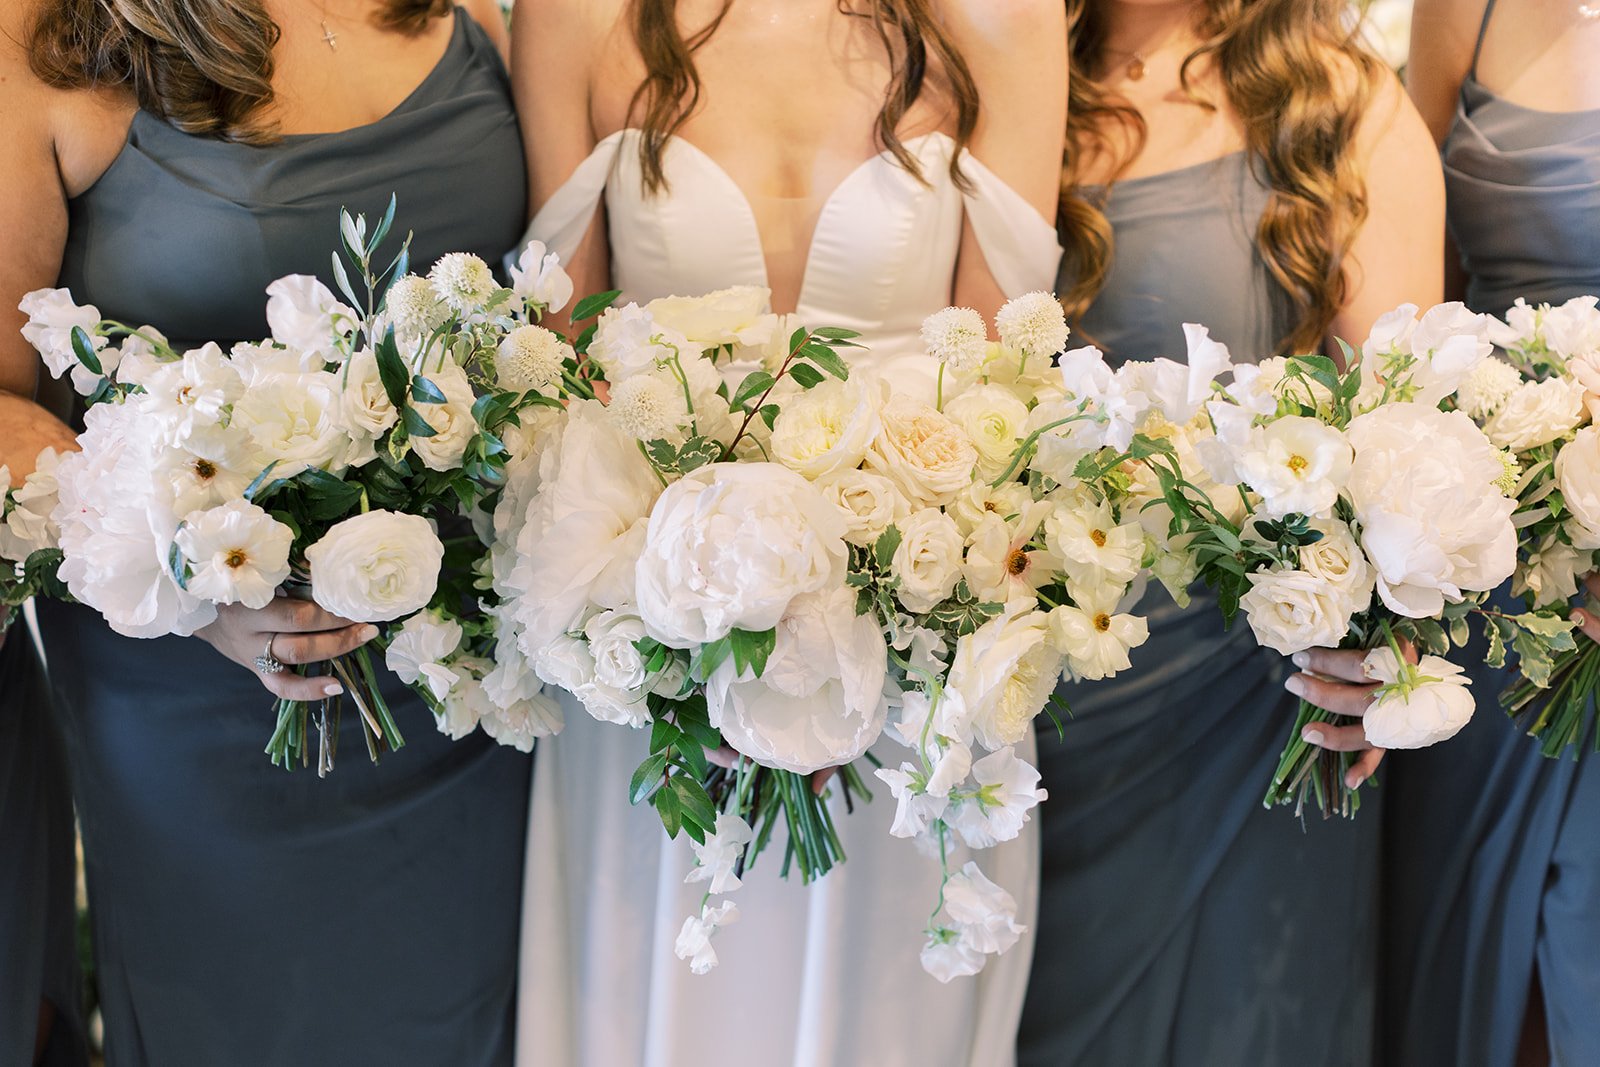 Bridal party florals of white garden roses, peonies, ranunculus, sweet peas, scabiosa, butterfly ranunculus and dark greenery in floral hues of white, cream, and blush. Designed by Rosemary and Finch in Nashville, TN.